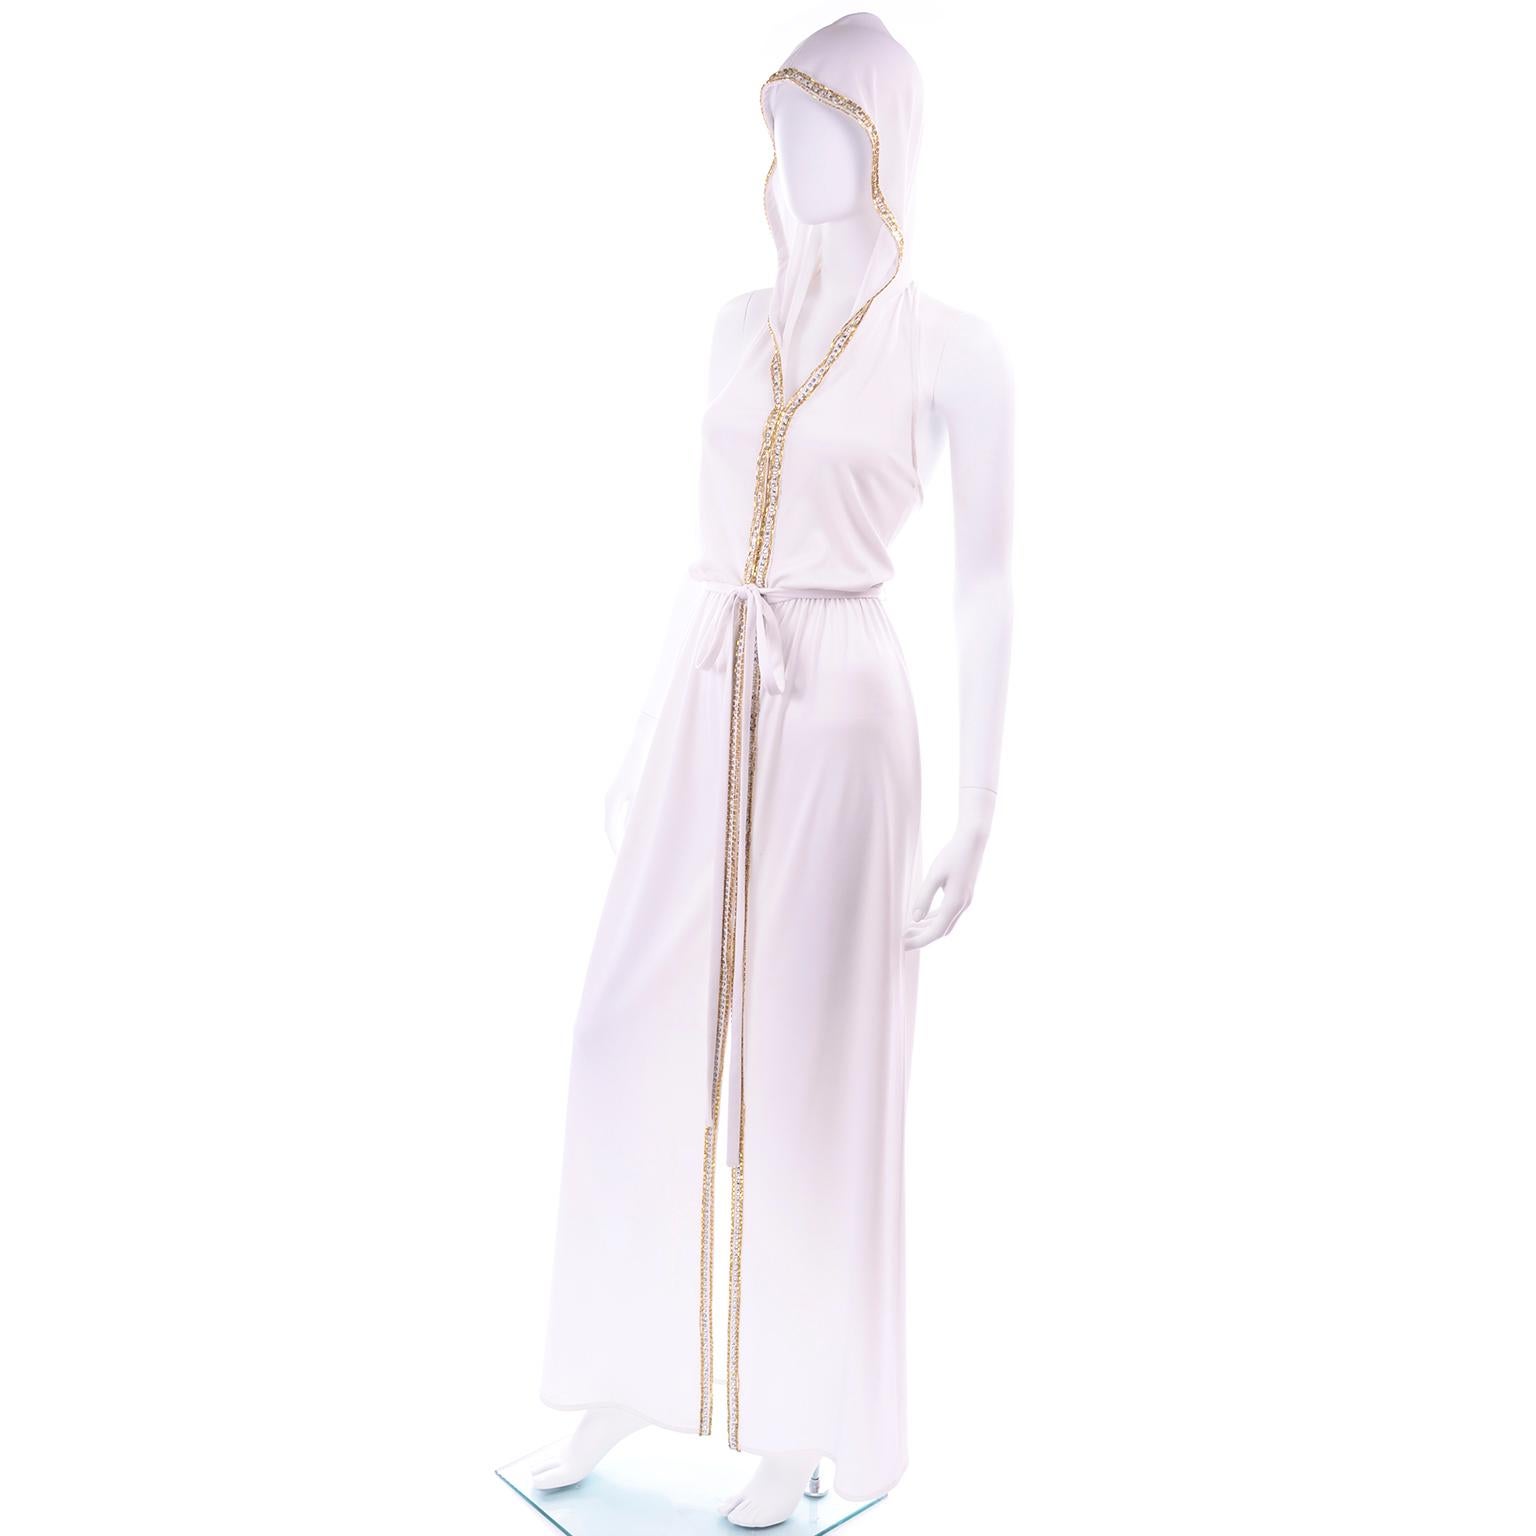 Women's 1970s Vintage White Hooded Jersey Maxi Dress With Gold Beads & Rhinestones